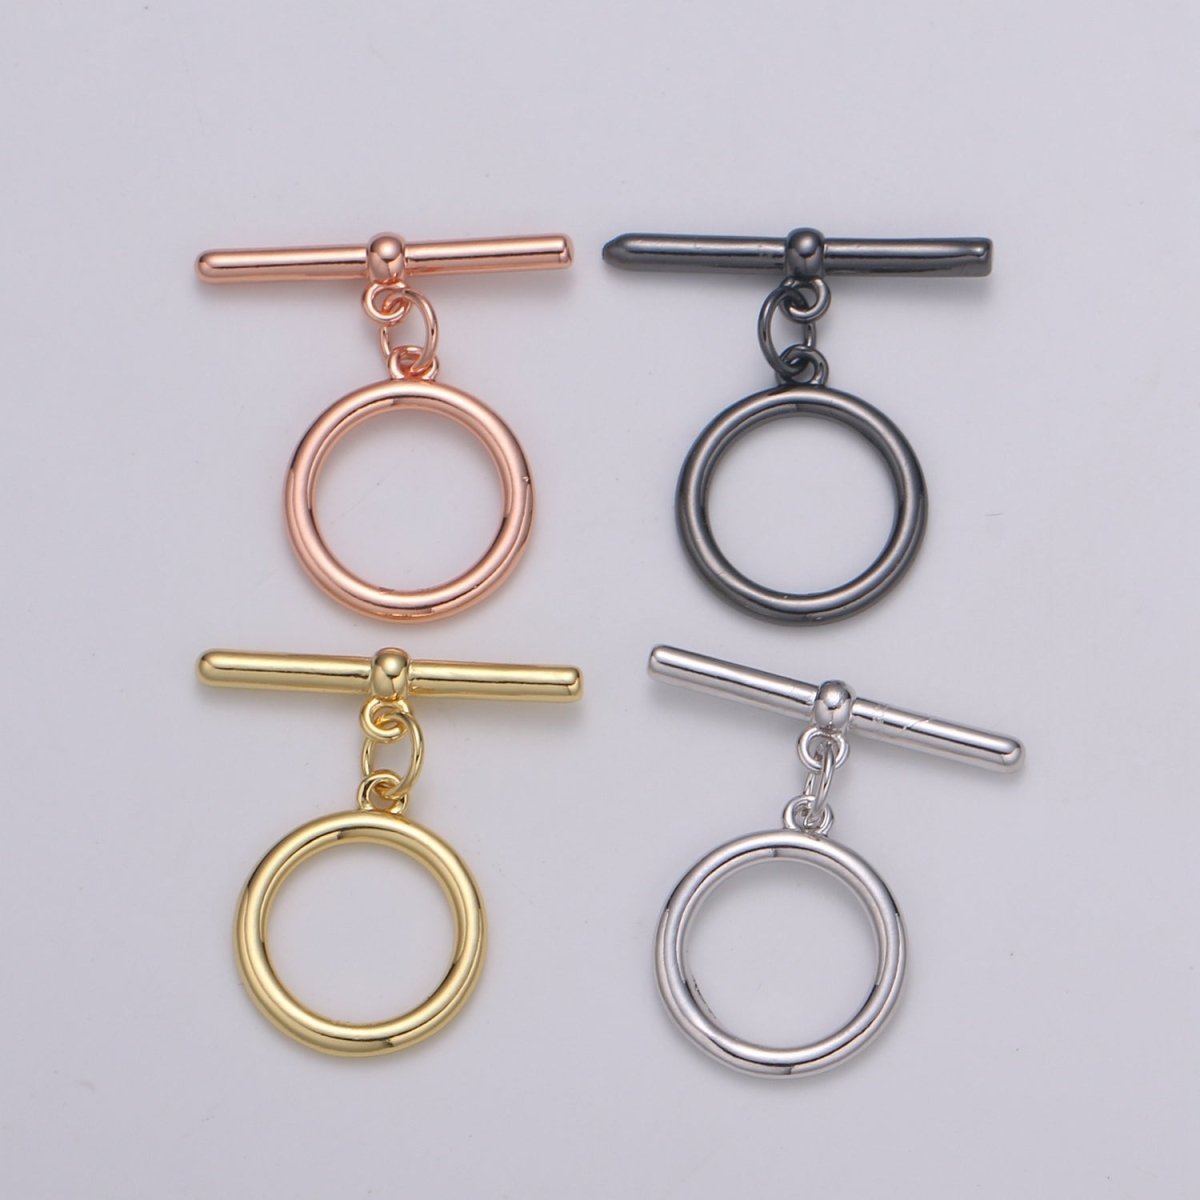 24K Gold Toggle Clasp with jump ring chose color-Gold, Rose Gold Black, Silver OT Clasp for Jewelry Making Supply L-140 L-214 L-215 L-216 - DLUXCA